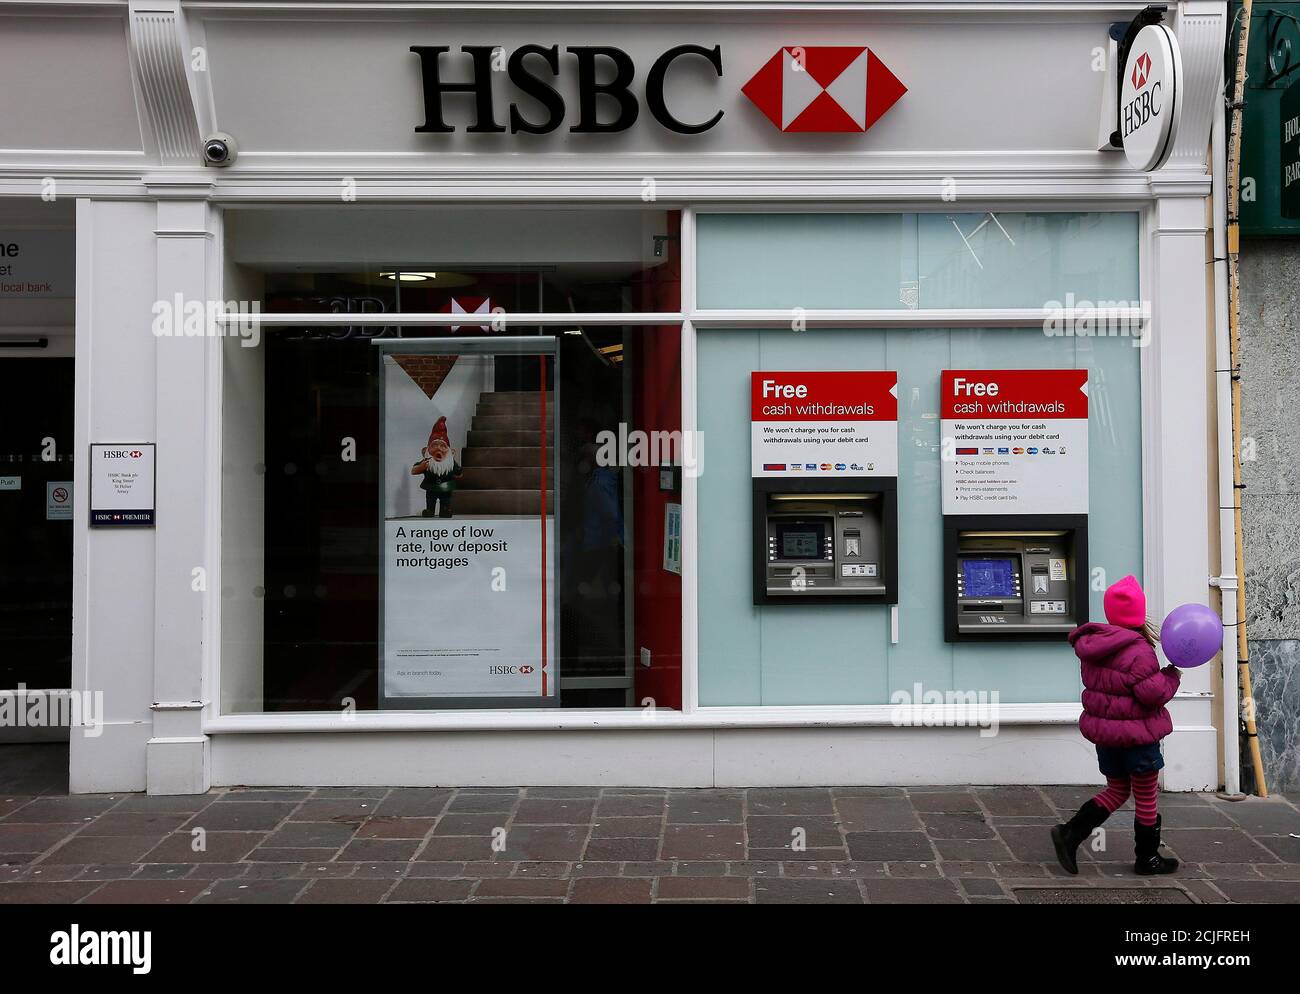 Hsbc Bank St Helier High Resolution Stock Photography and Images - Alamy